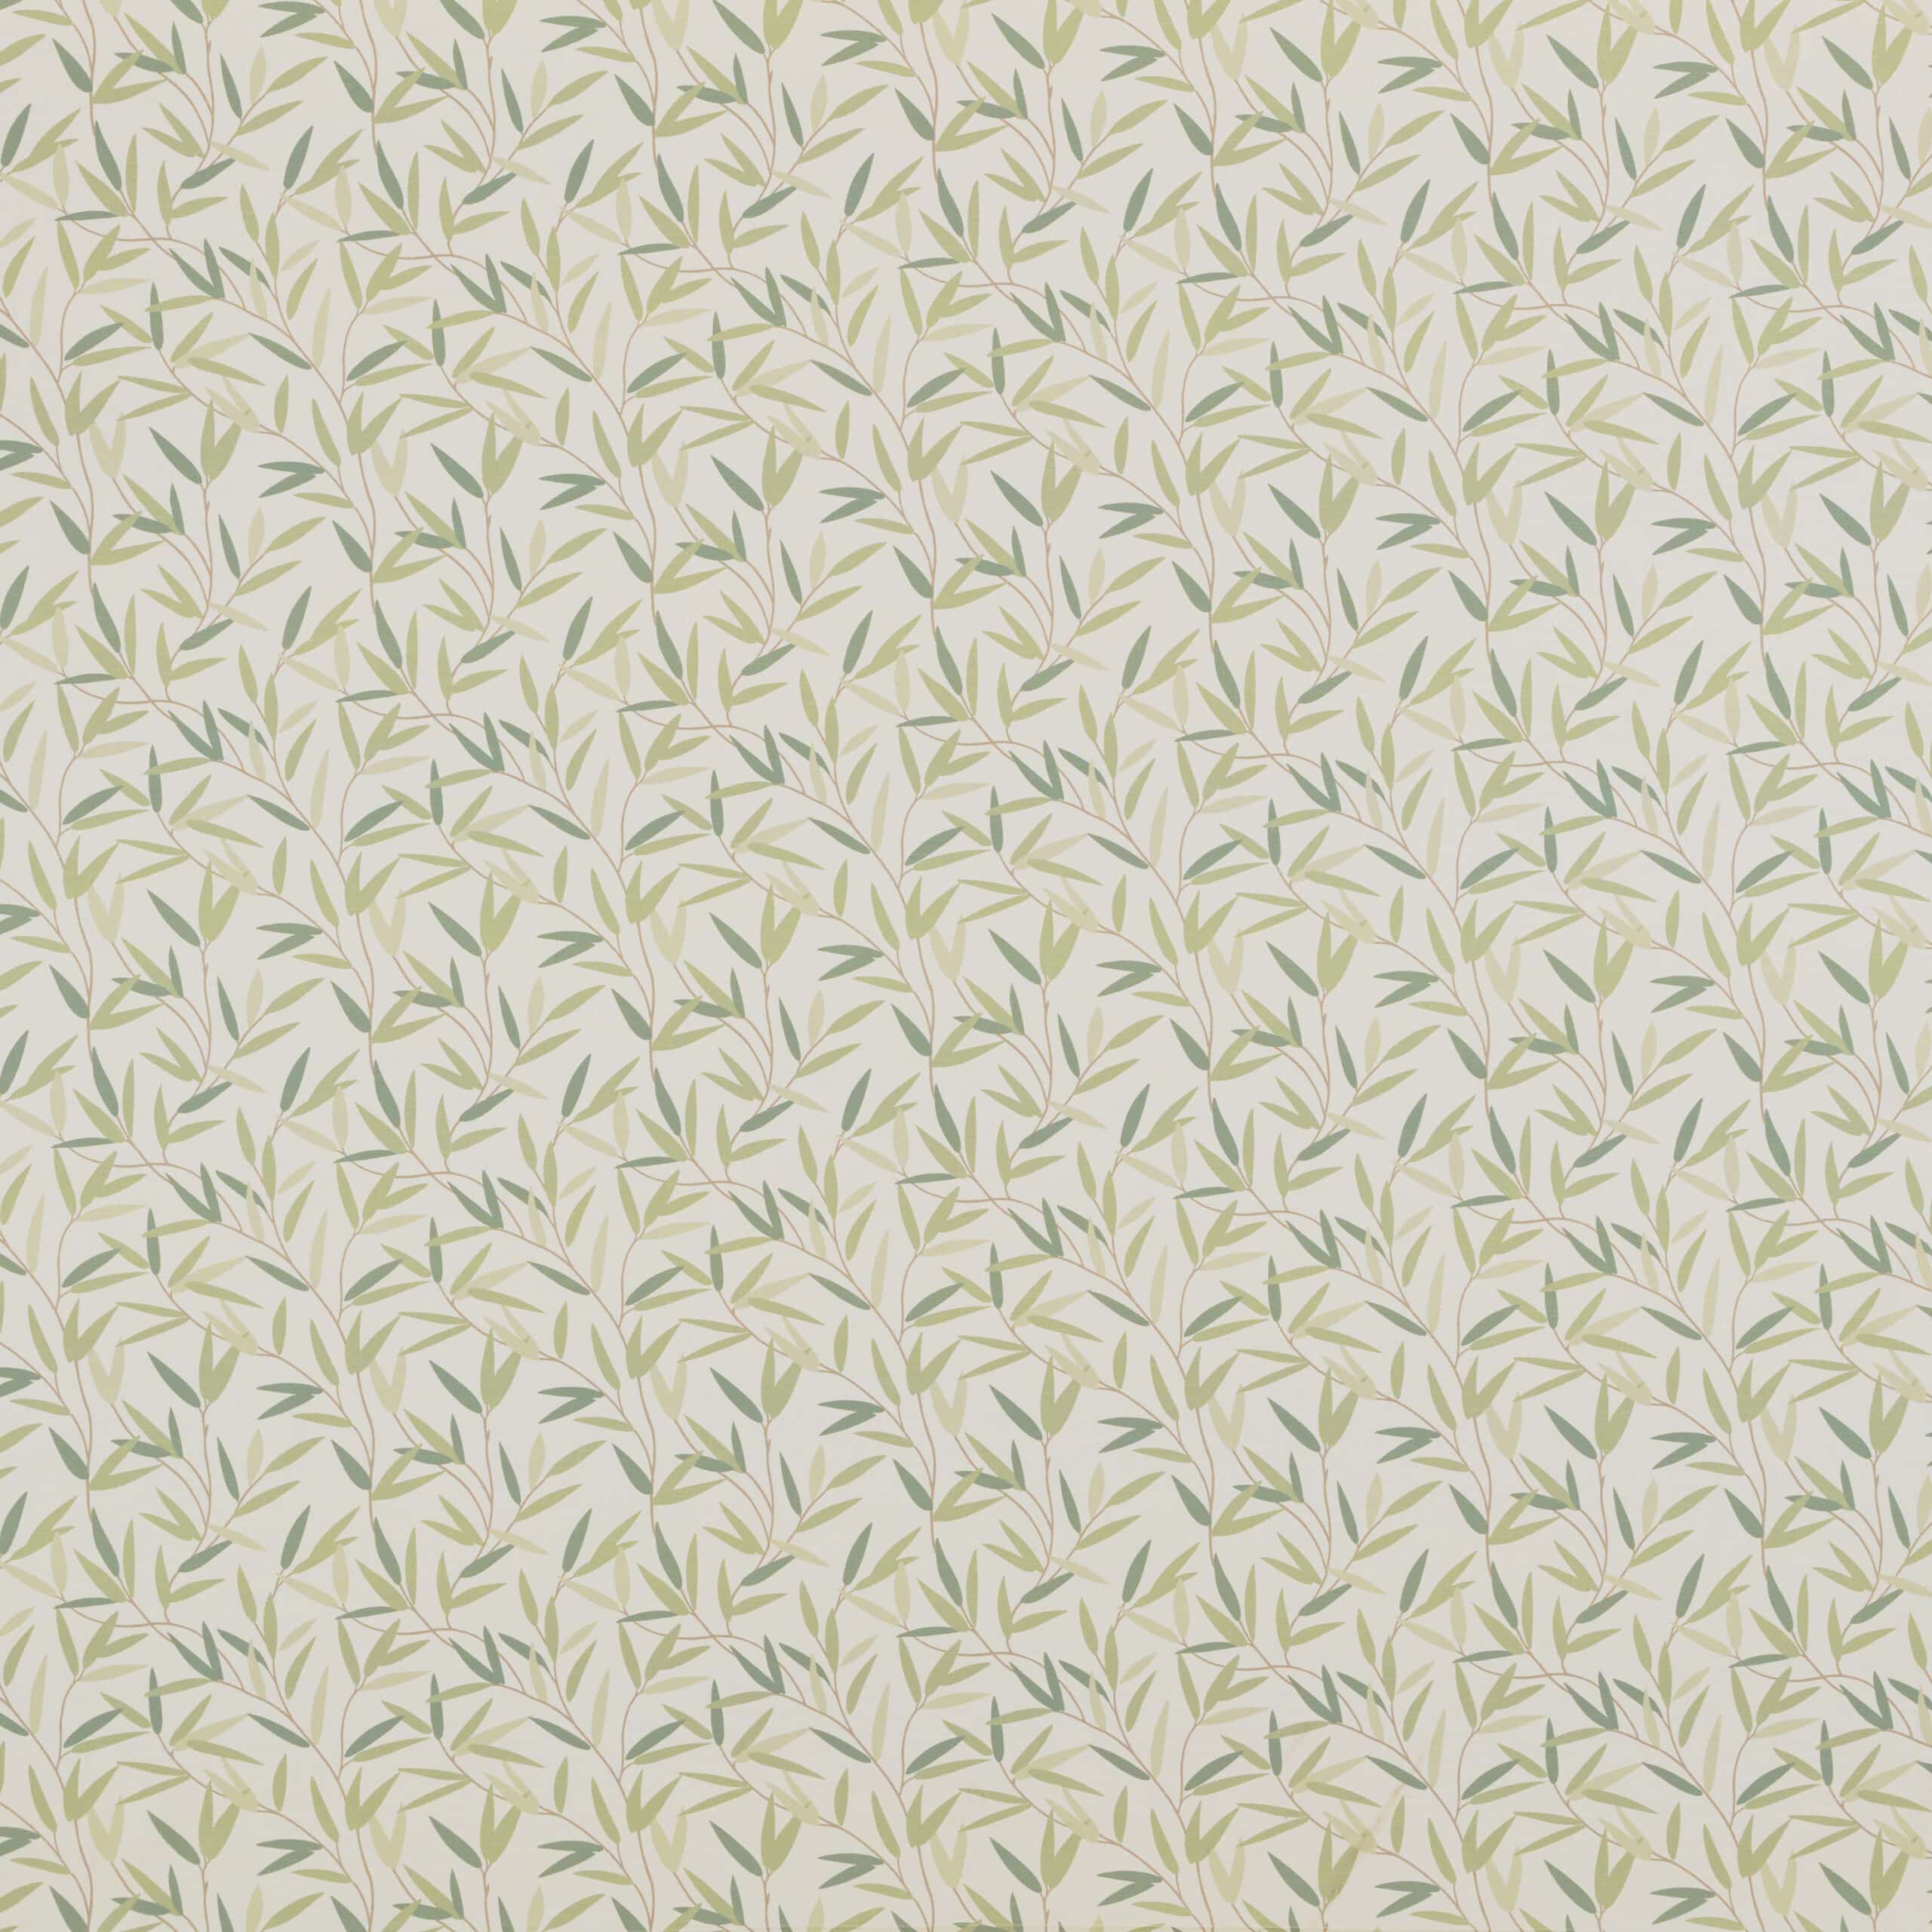 Willow Leaf Fabric